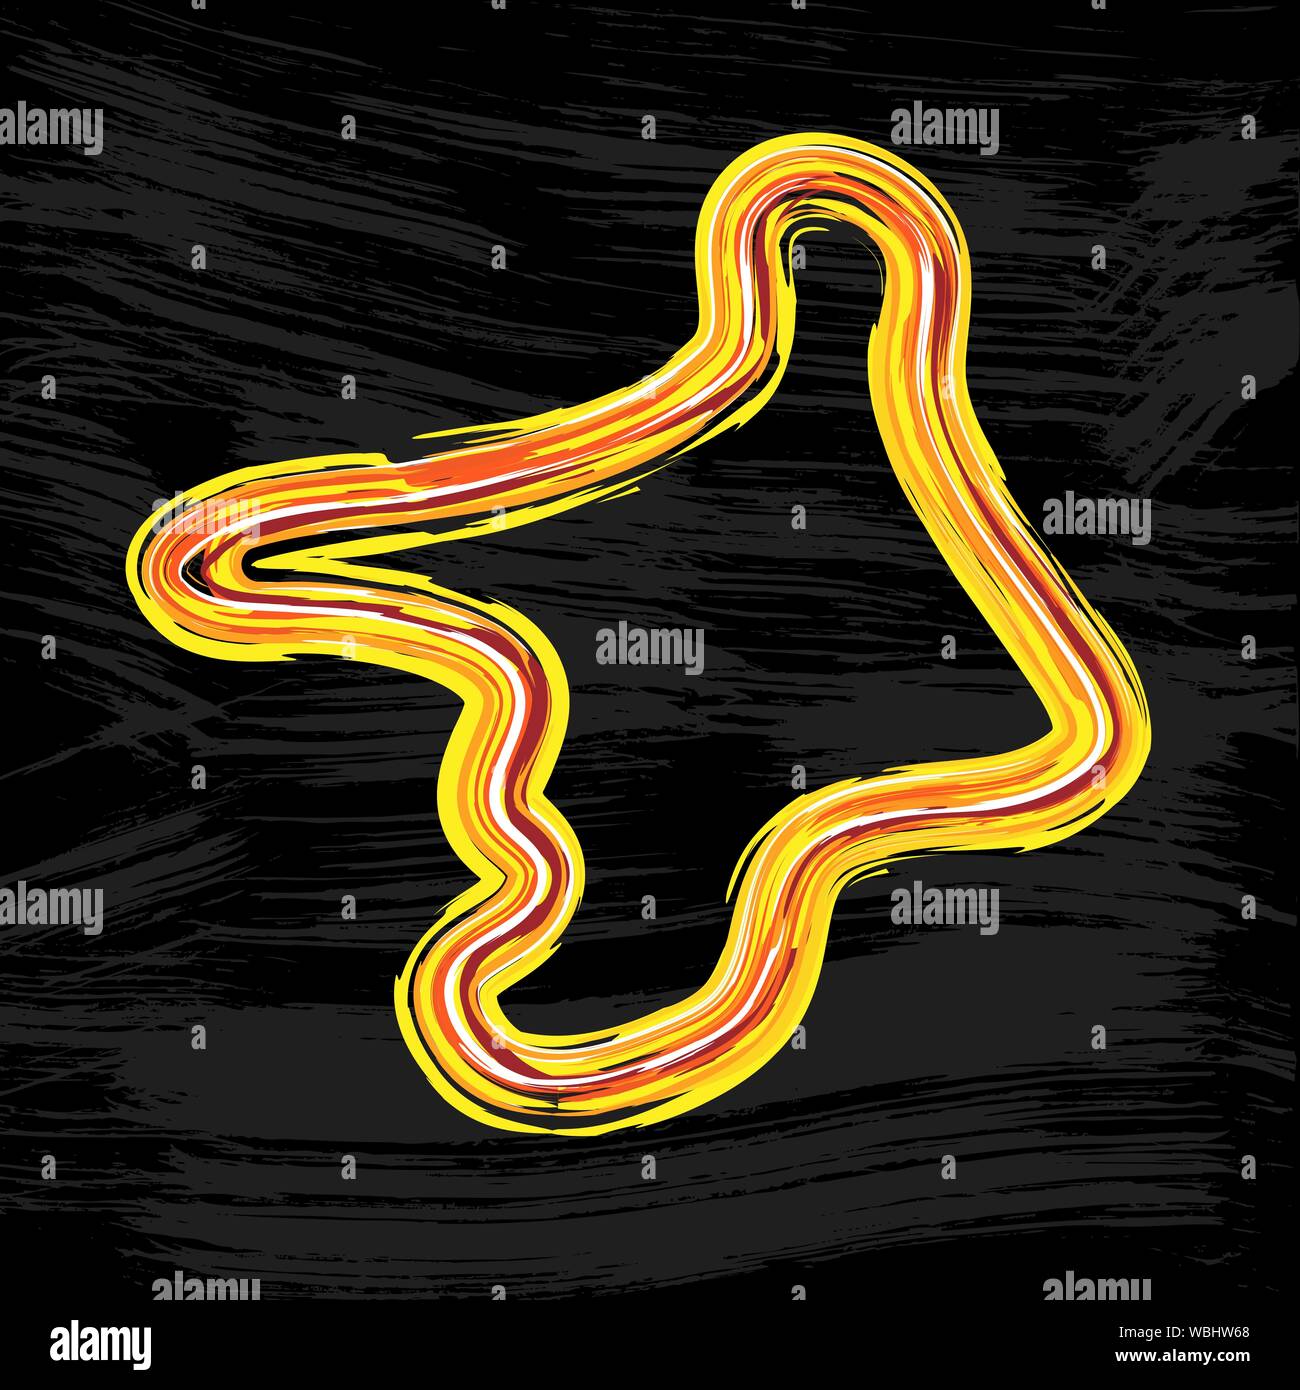 Grunge brush race track circuit silhouette isolated on black background Stock Vector